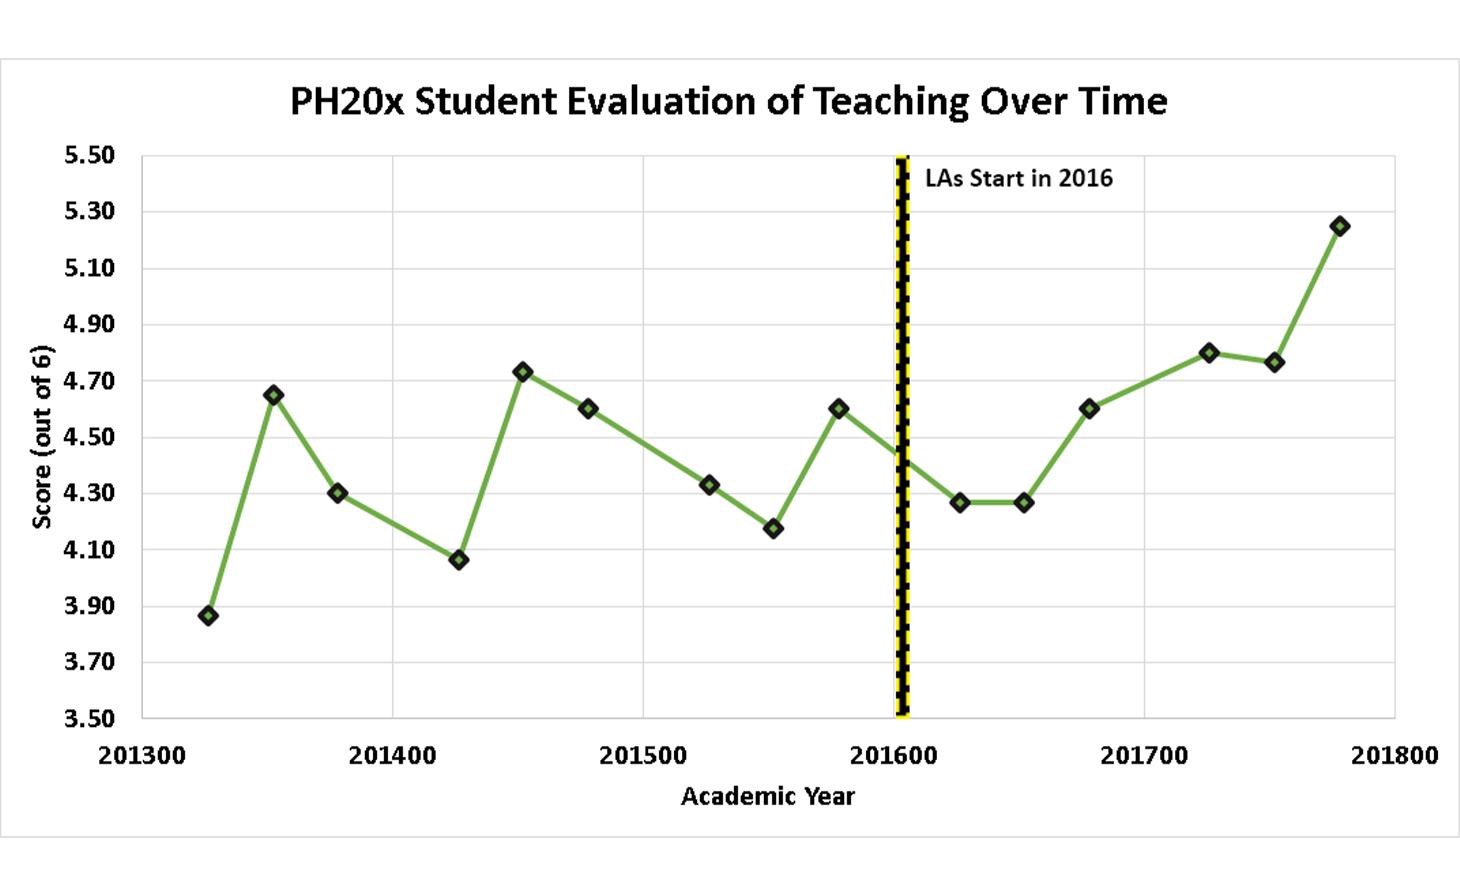 Student evaluation of teaching over time